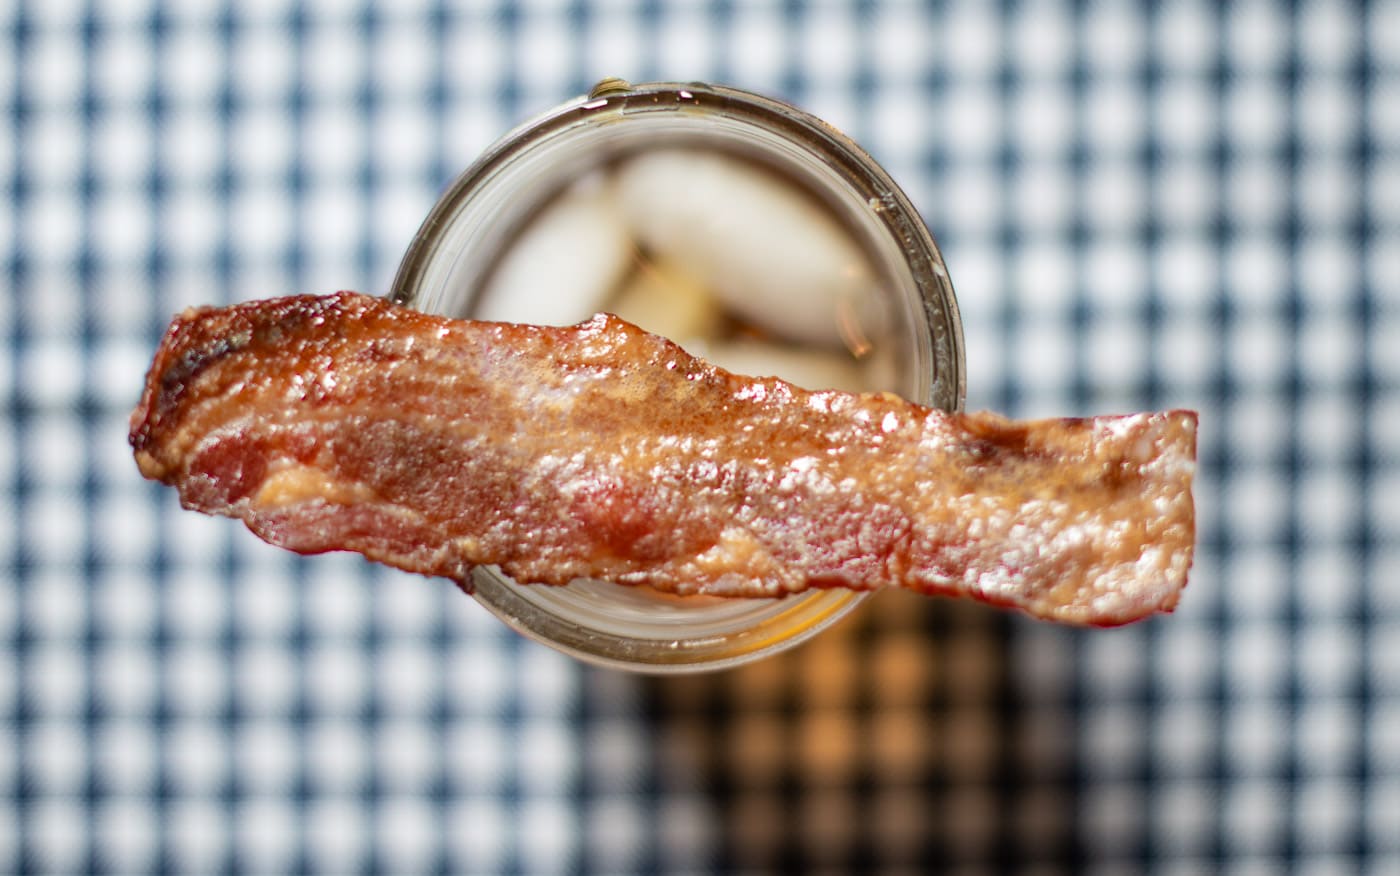 Candied bacon on a drink glass